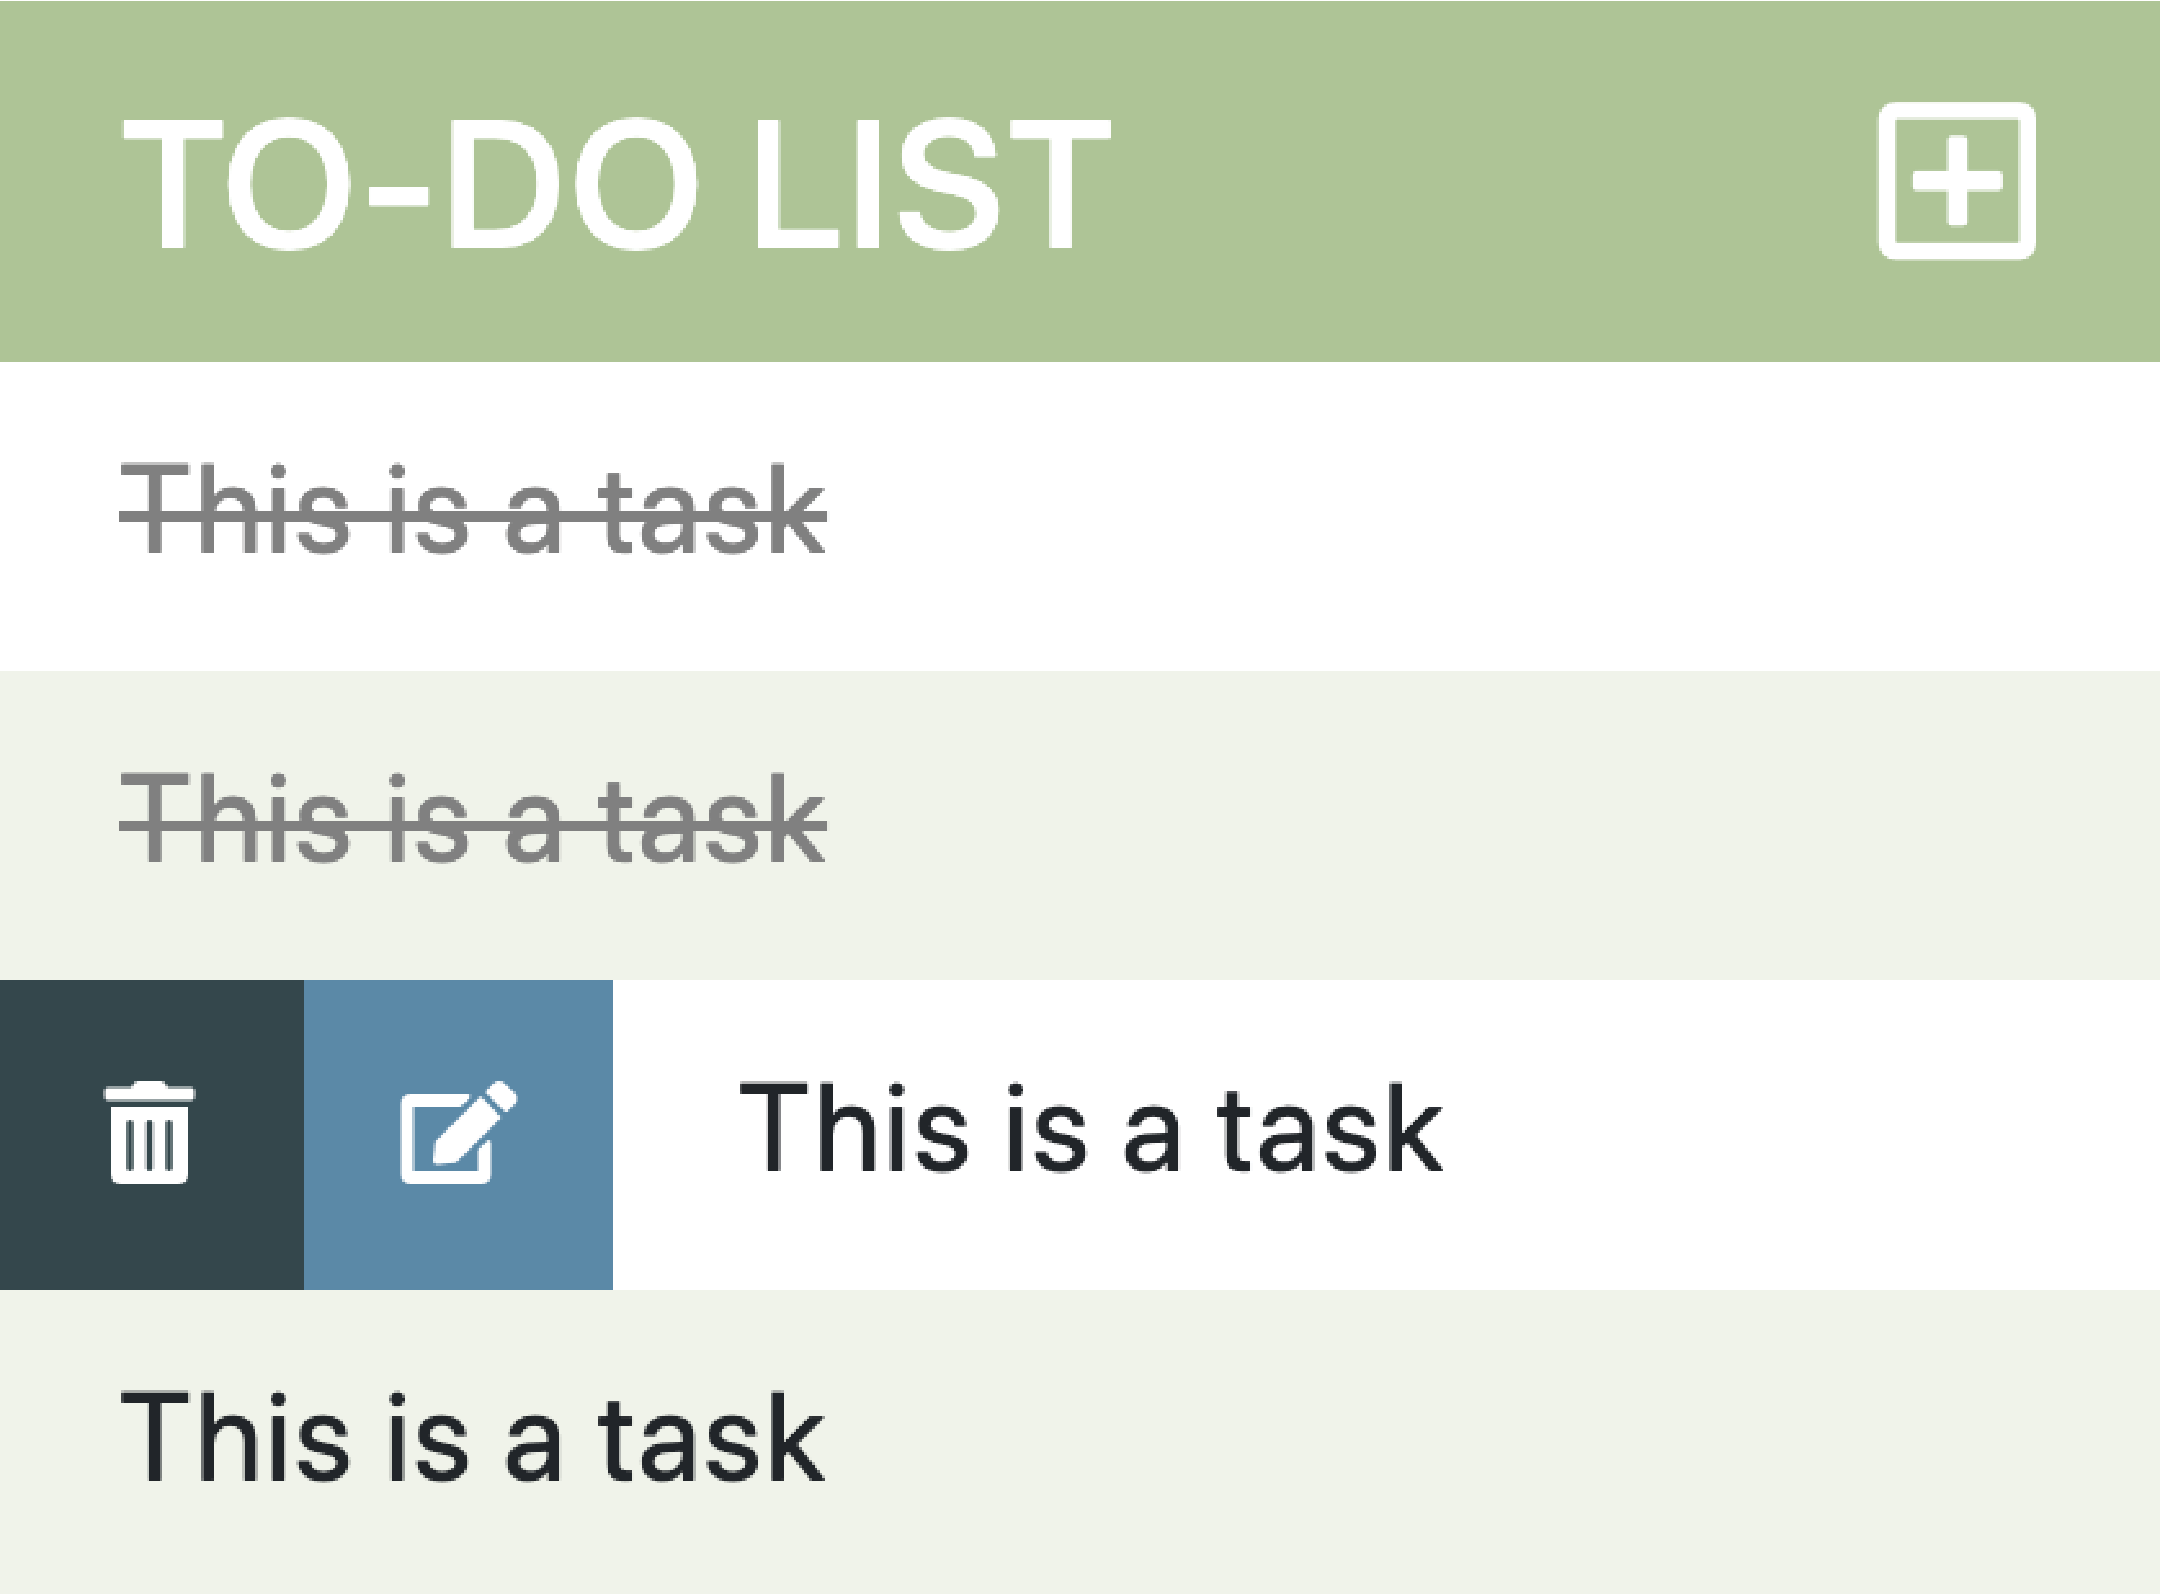 TO-DO LIST screenshot with marked tasks and delete and edit buttons showing up